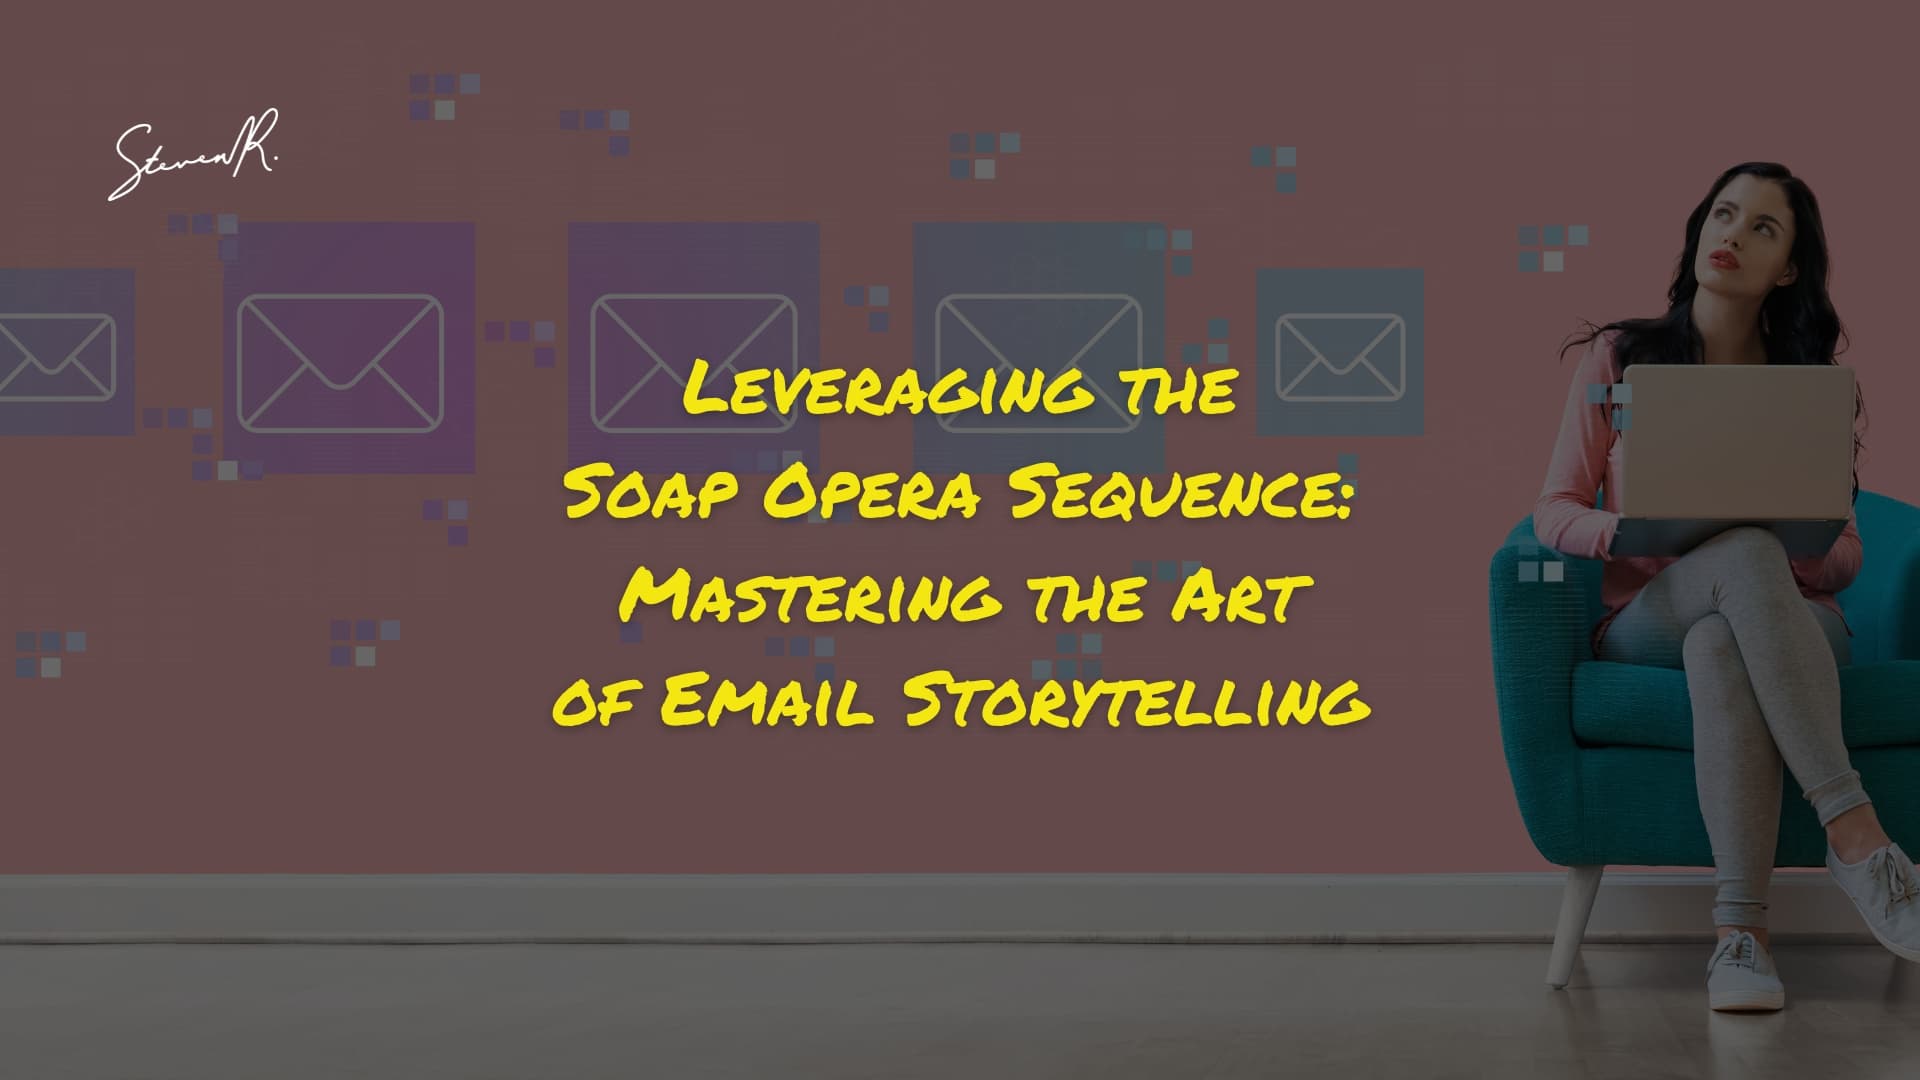 Leveraging the Soap Opera Sequence: Mastering the Art of Email Storytelling